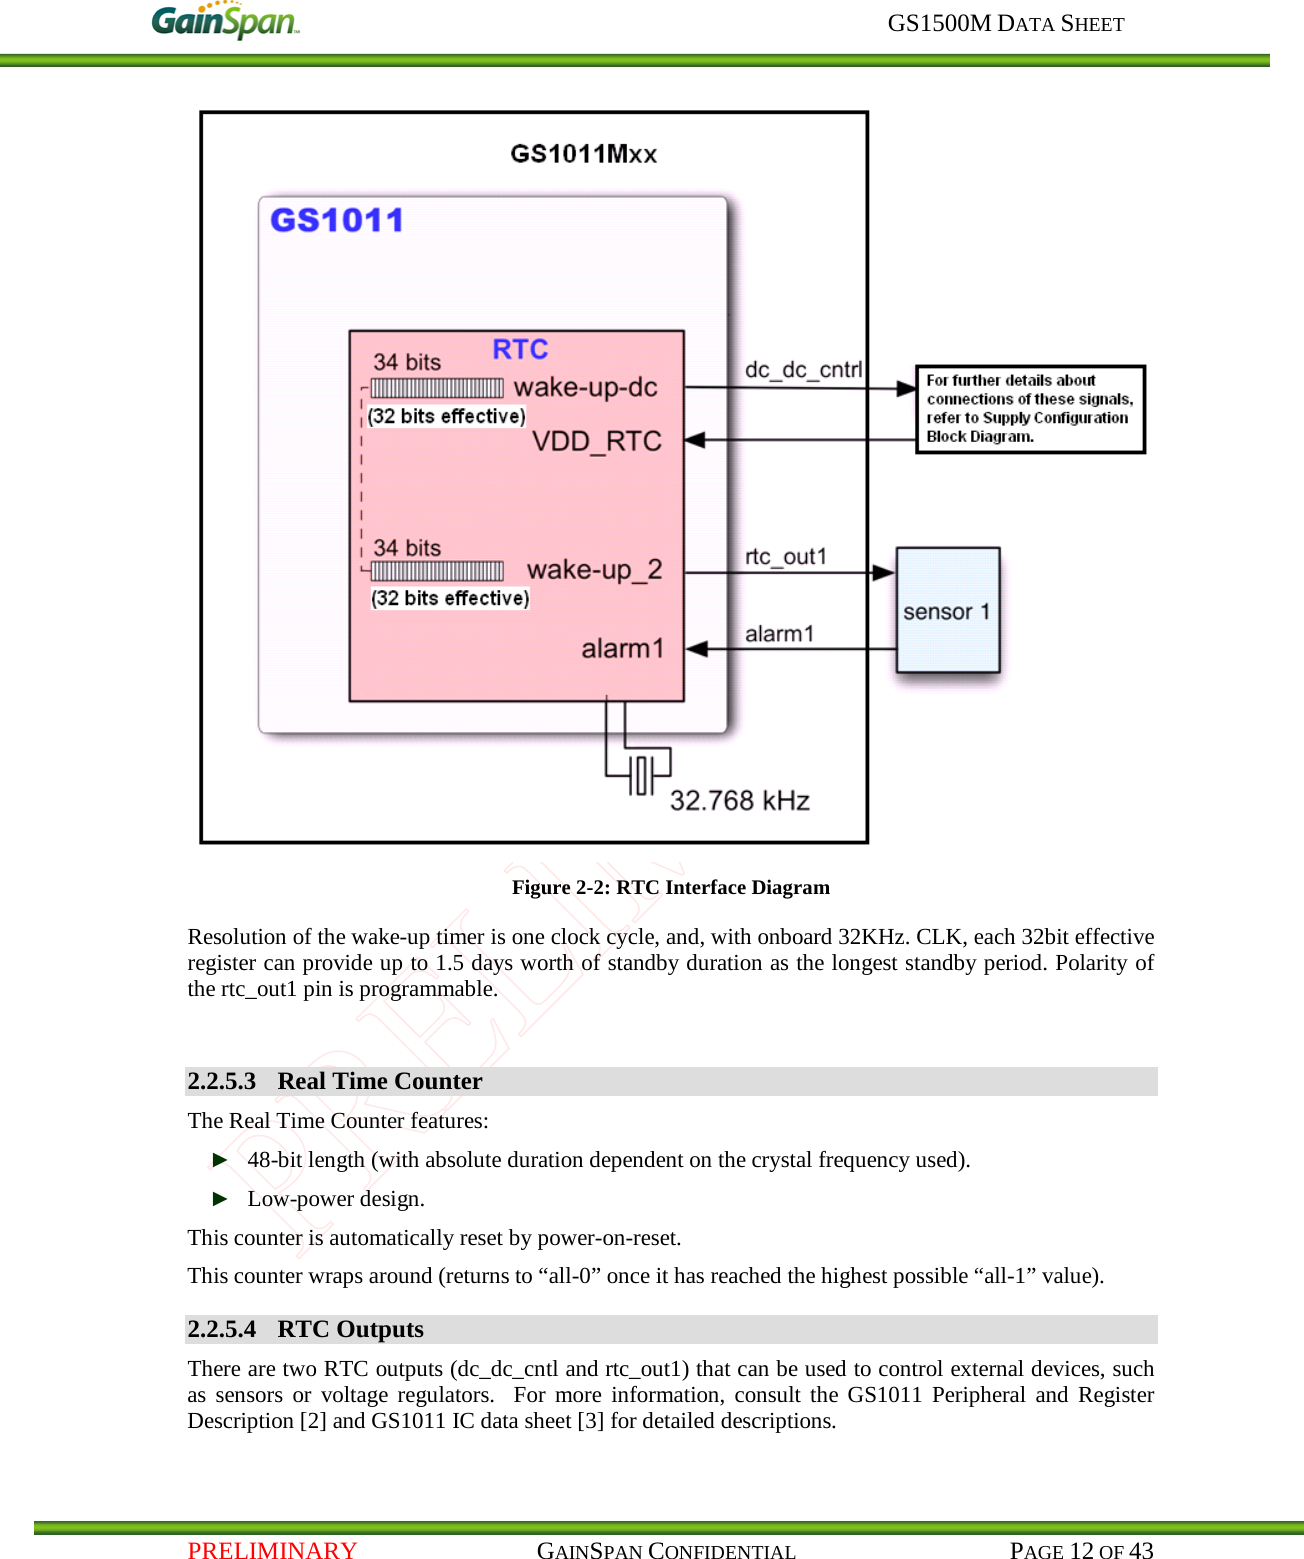     GS1500M DATA SHEET   PRELIMINARY                                    GAINSPAN CONFIDENTIAL                                           PAGE 12 OF 43  Figure 2-2: RTC Interface Diagram    Resolution of the wake-up timer is one clock cycle, and, with onboard 32KHz. CLK, each 32bit effective register can provide up to 1.5 days worth of standby duration as the longest standby period. Polarity of the rtc_out1 pin is programmable.  2.2.5.3 Real Time Counter The Real Time Counter features: ► 48-bit length (with absolute duration dependent on the crystal frequency used). ► Low-power design. This counter is automatically reset by power-on-reset. This counter wraps around (returns to “all-0” once it has reached the highest possible “all-1” value). 2.2.5.4 RTC Outputs There are two RTC outputs (dc_dc_cntl and rtc_out1) that can be used to control external devices, such as sensors or voltage regulators.  For more information, consult the GS1011 Peripheral and Register Description [2] and GS1011 IC data sheet [3] for detailed descriptions. 